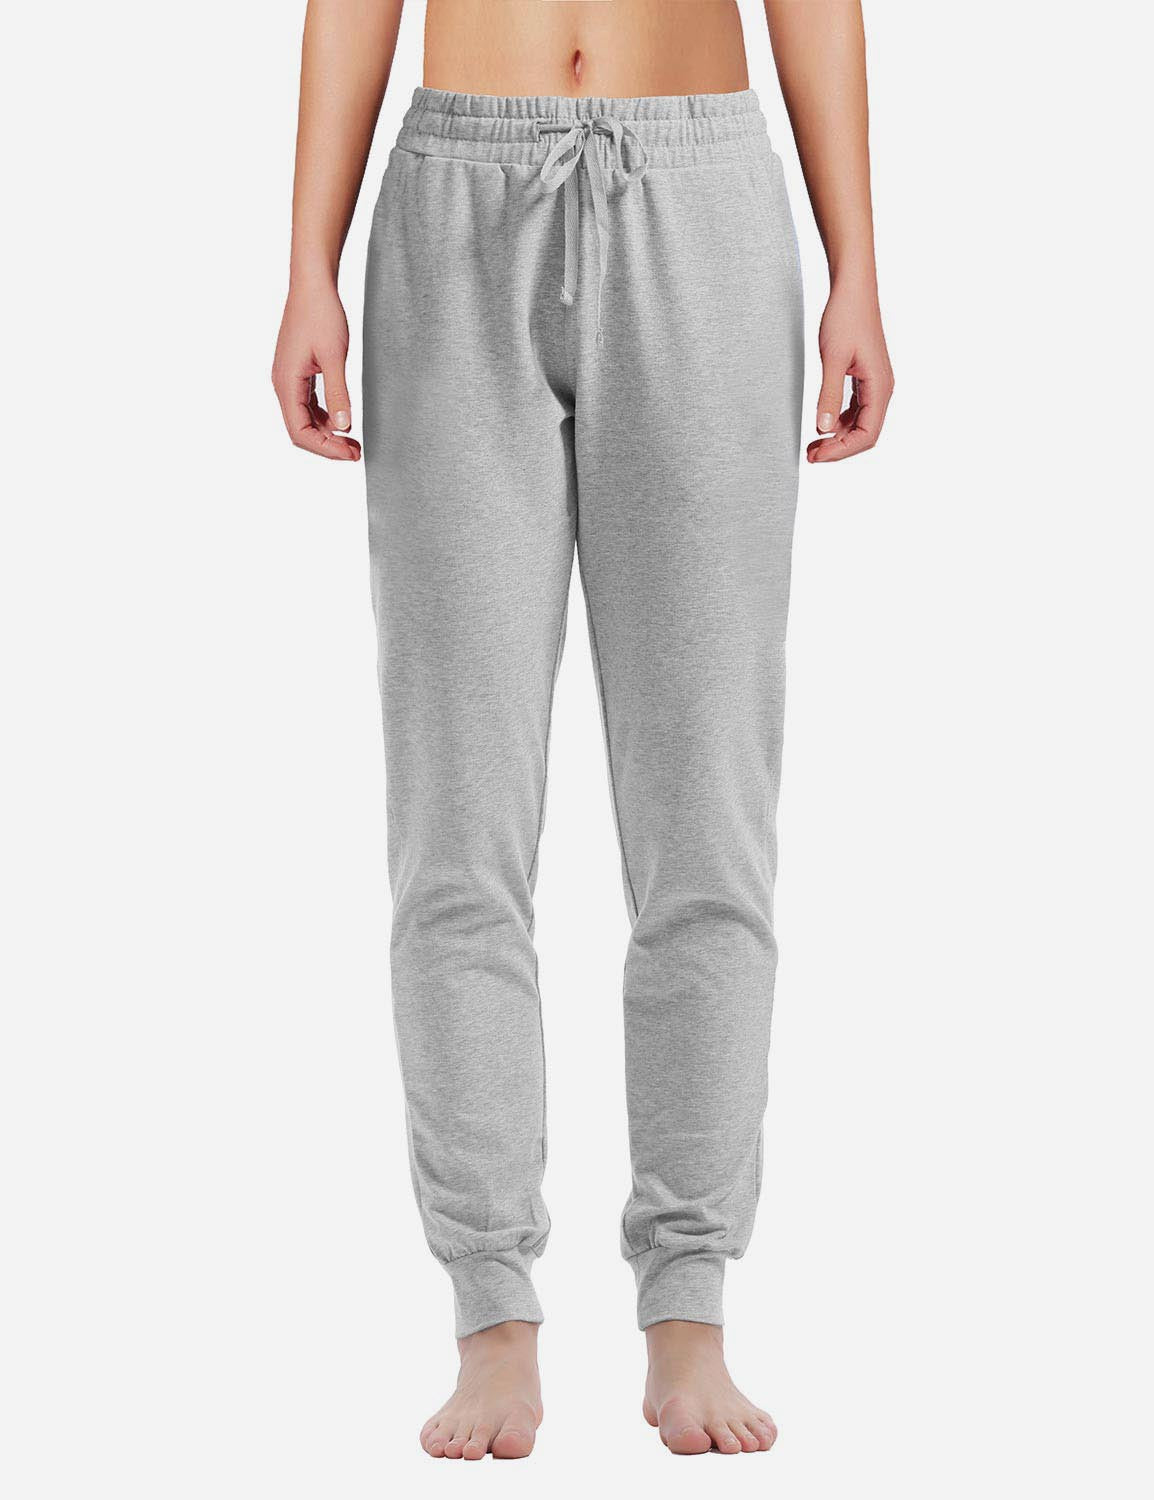 Baleaf Women's Cotton Comfy Pocketed & Tapered Weekend Joggers abh103 Light Gray Front